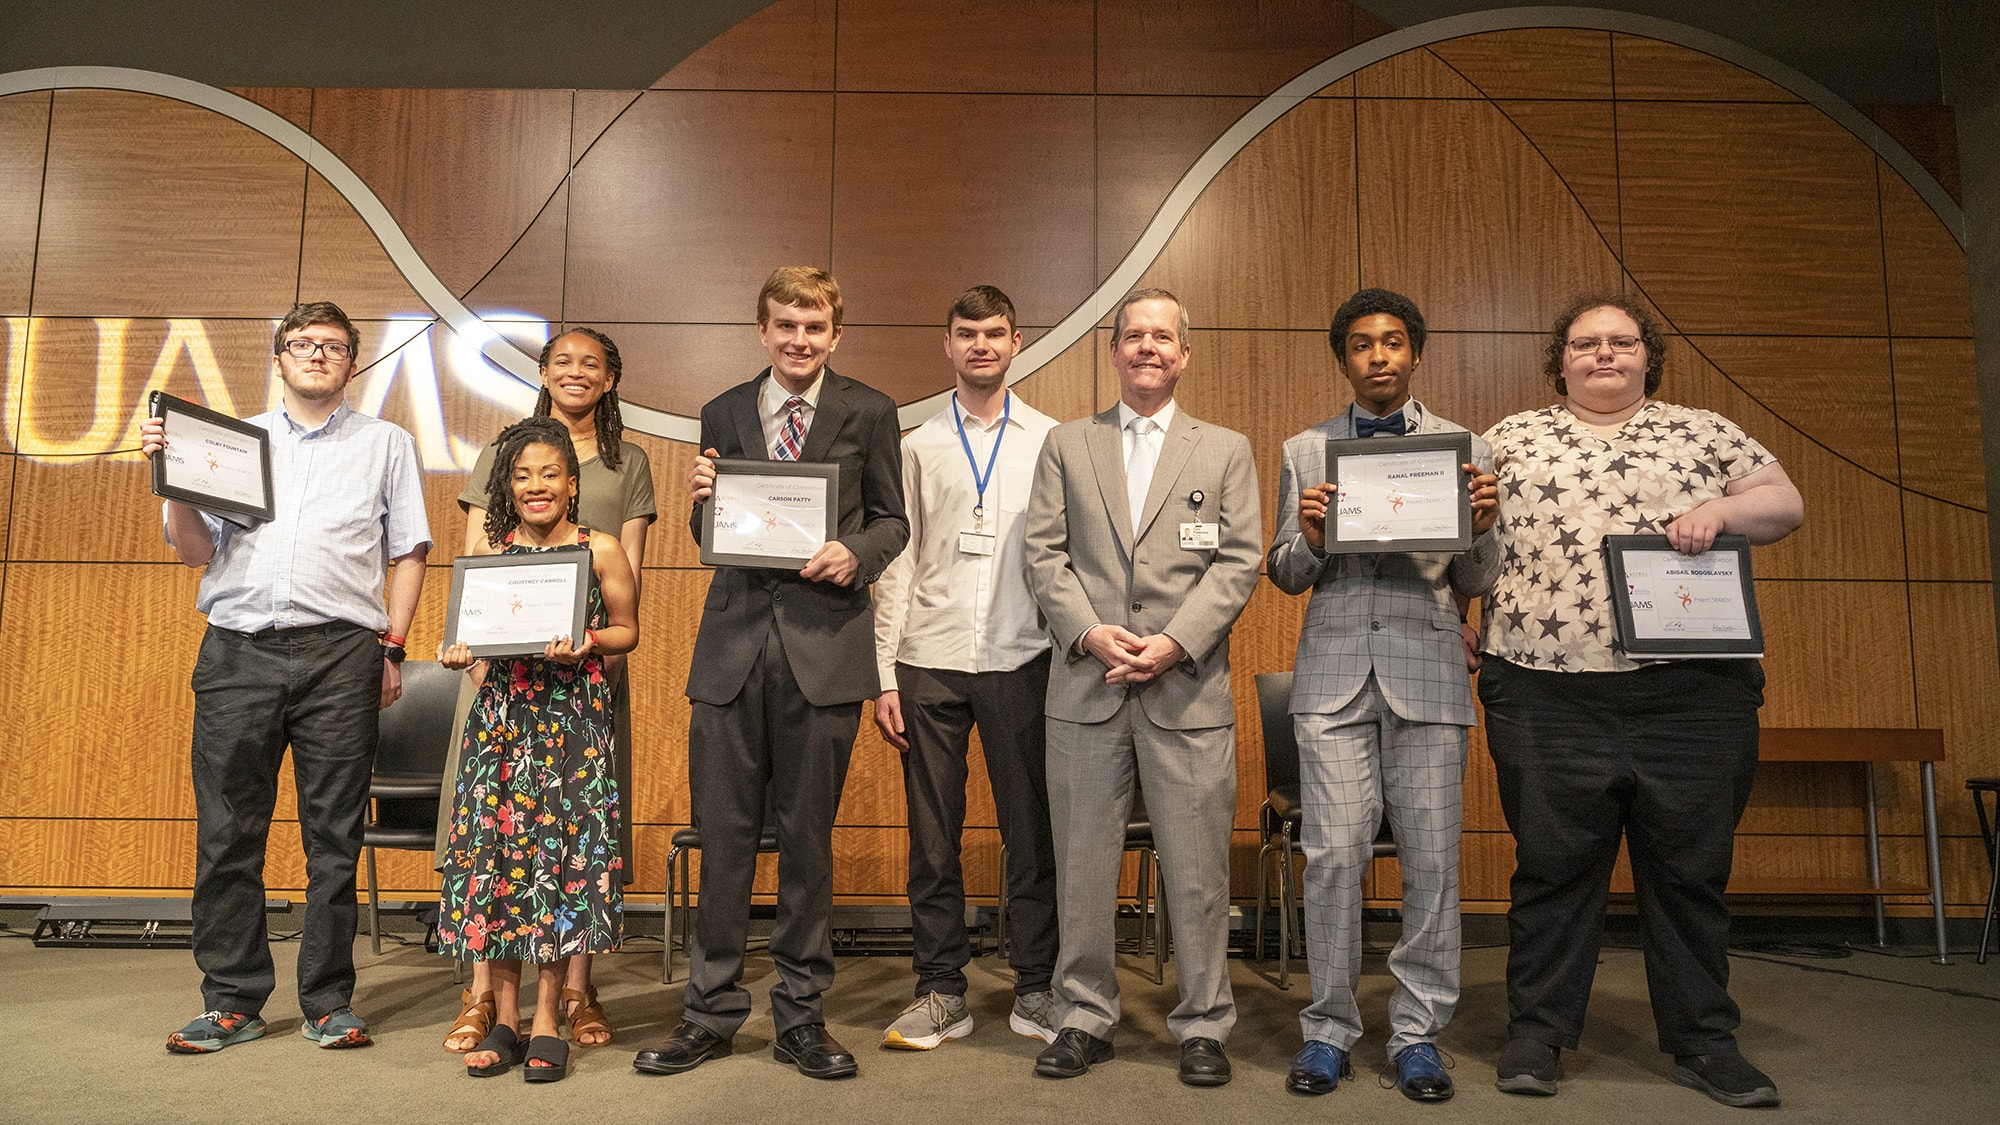 UAMS Chancellor Cam Patterson, third from right, stands with UAMS Project SEARCH 2023 graduates, left: Colby Fountain, Jakiyah Williams, Courtney Carroll, Carson Patty, Chase Caterbury, Patterson, Ranal Freeman II and Abby Bogoslavsky